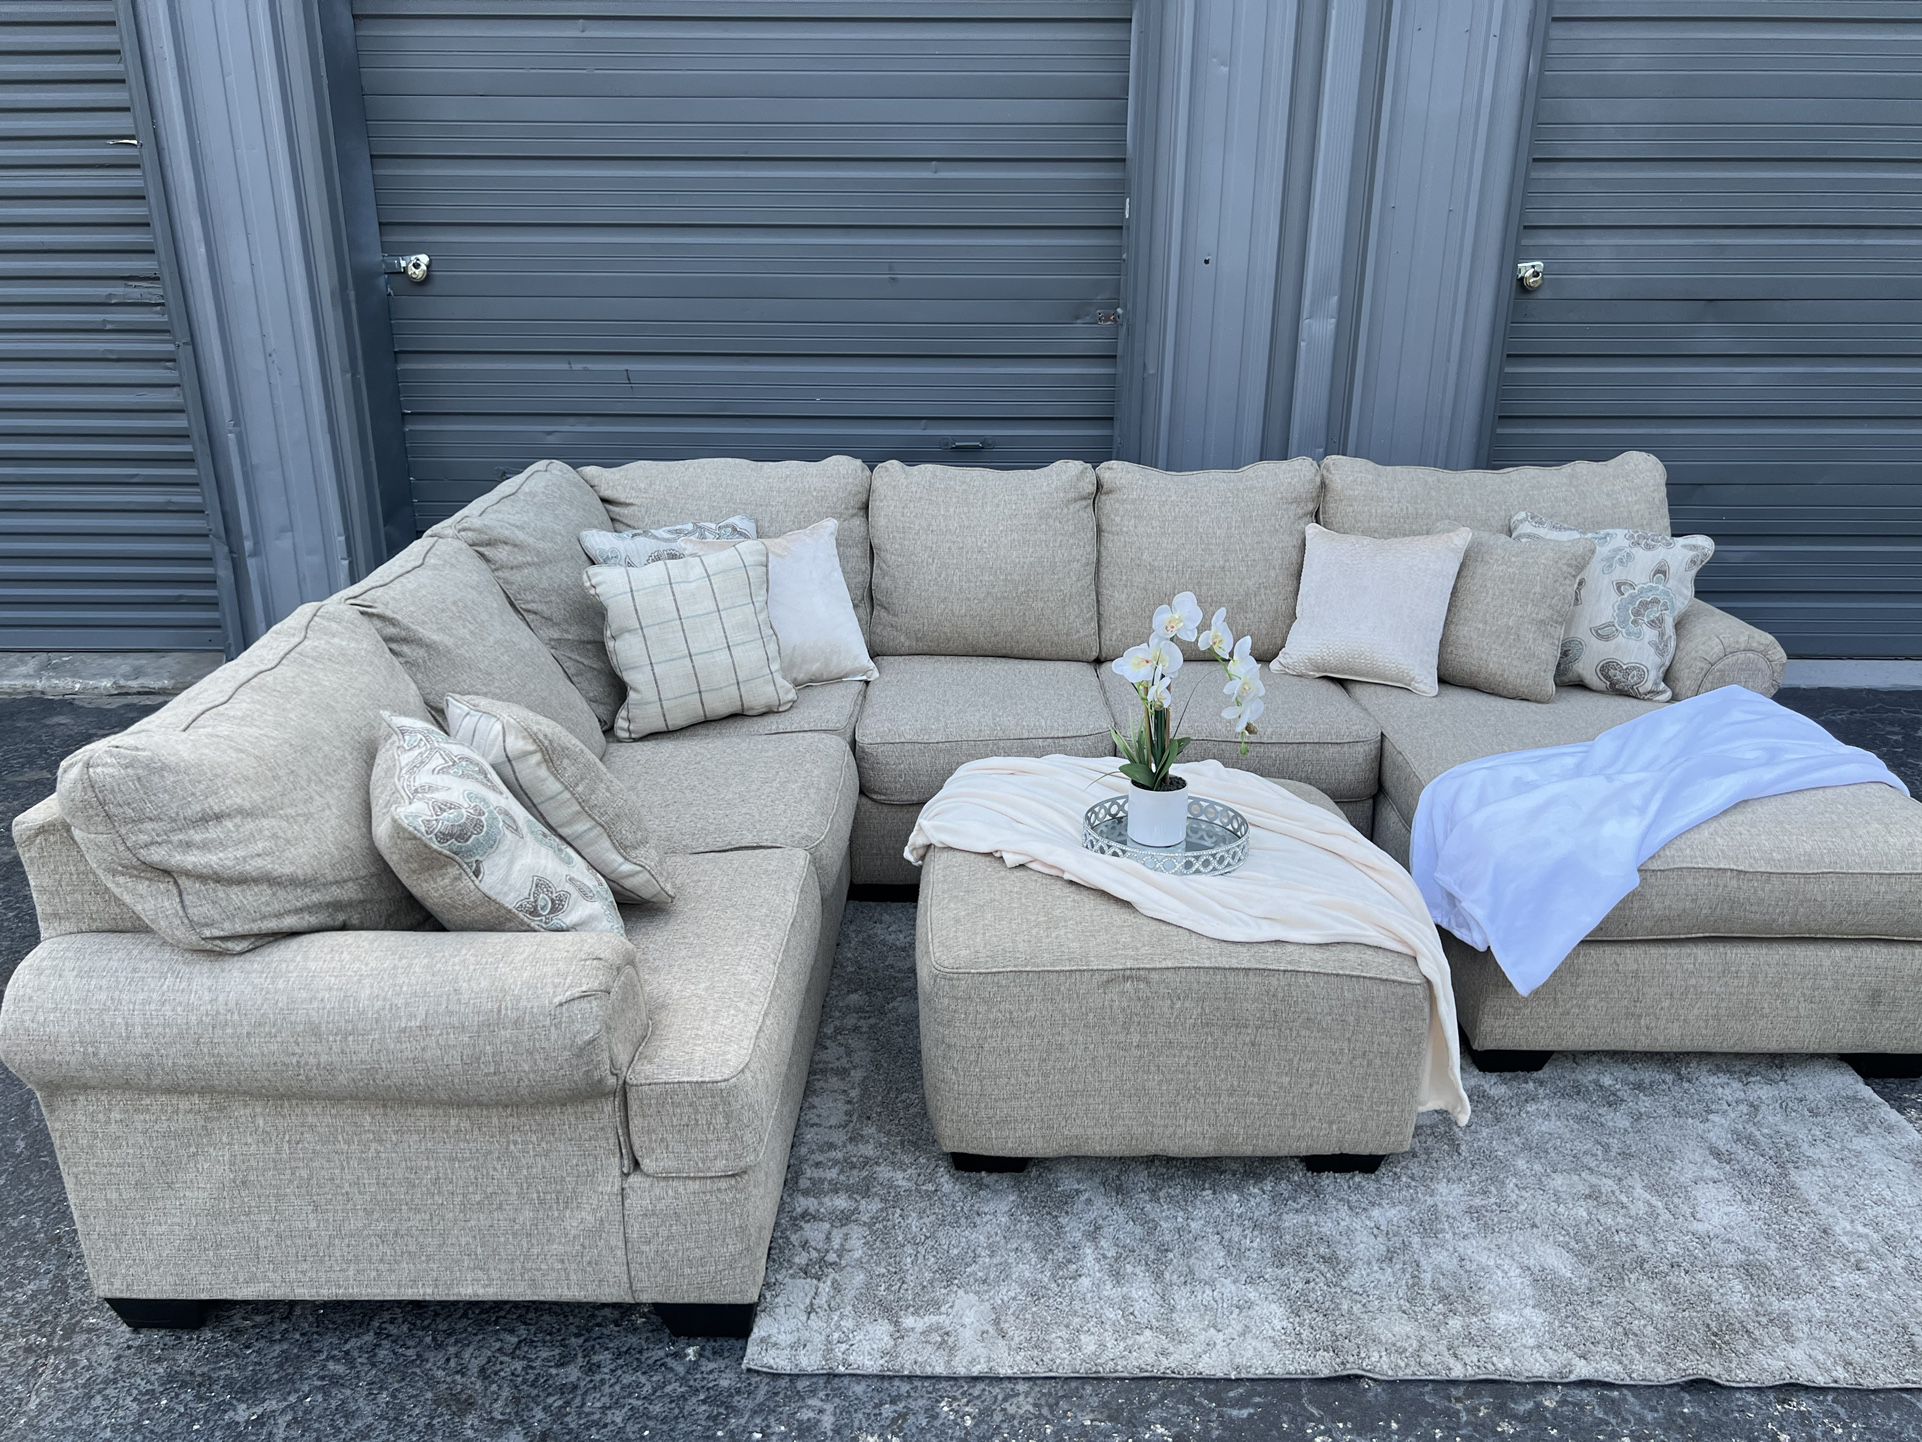 Sectional/couch/sofa, Havertys, Pickup In Tampa, Delivery Available ,96x127x66